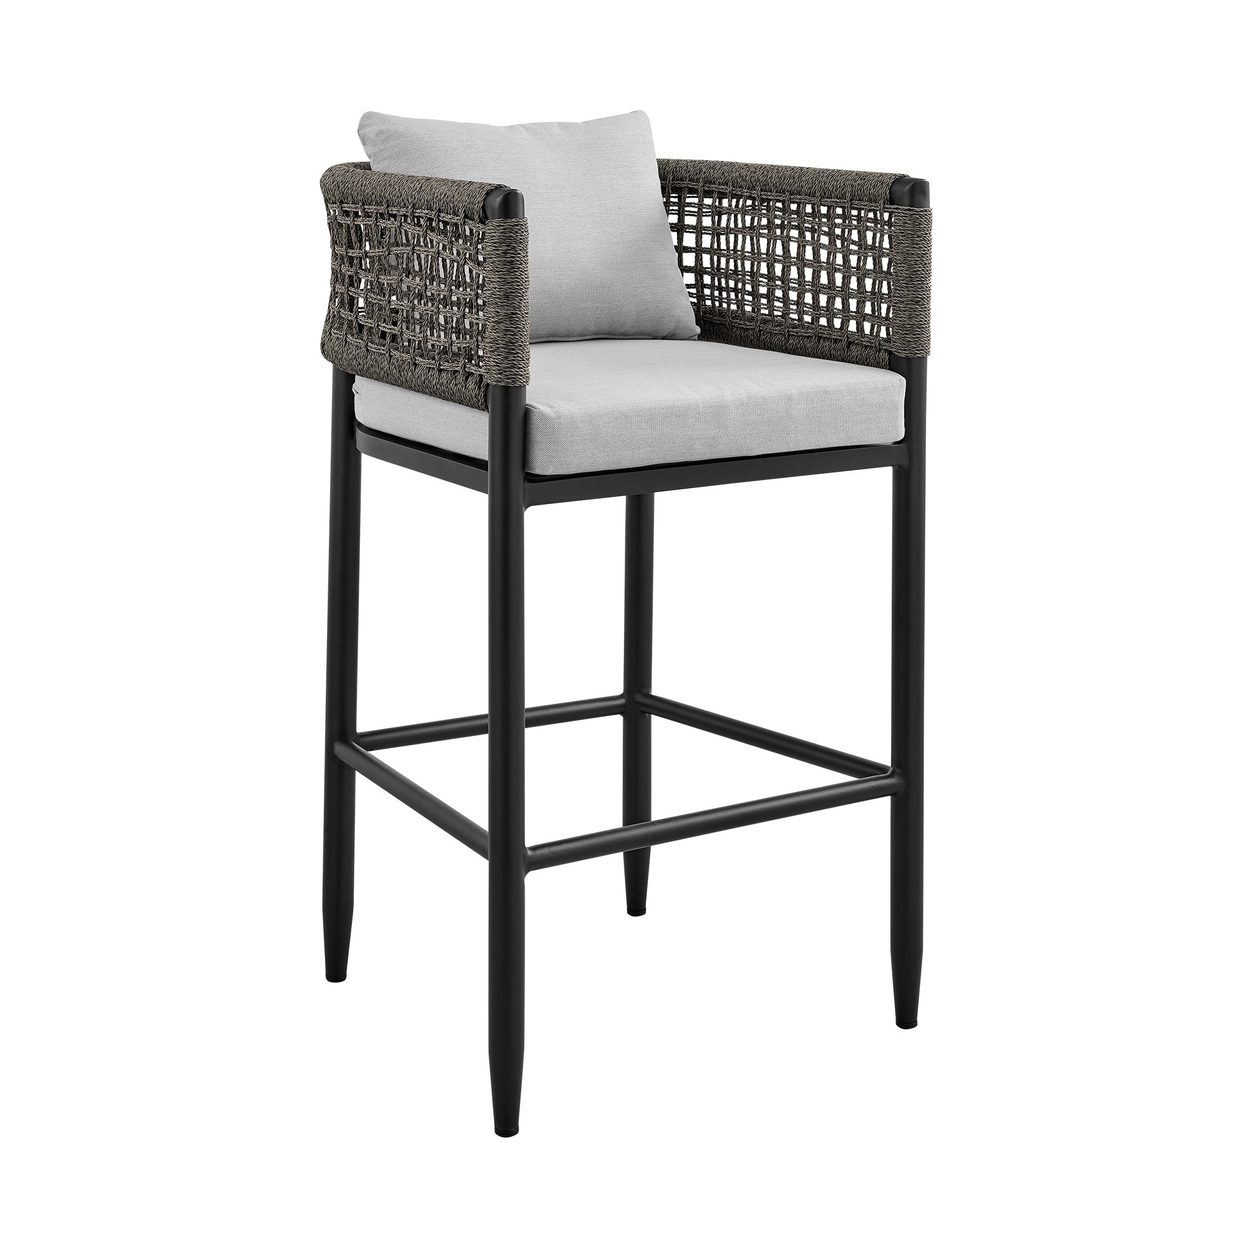 Troy 26 Inch Patio Counter Height Stool, Aluminum And Rope, Black And Gray- Saltoro Sherpi